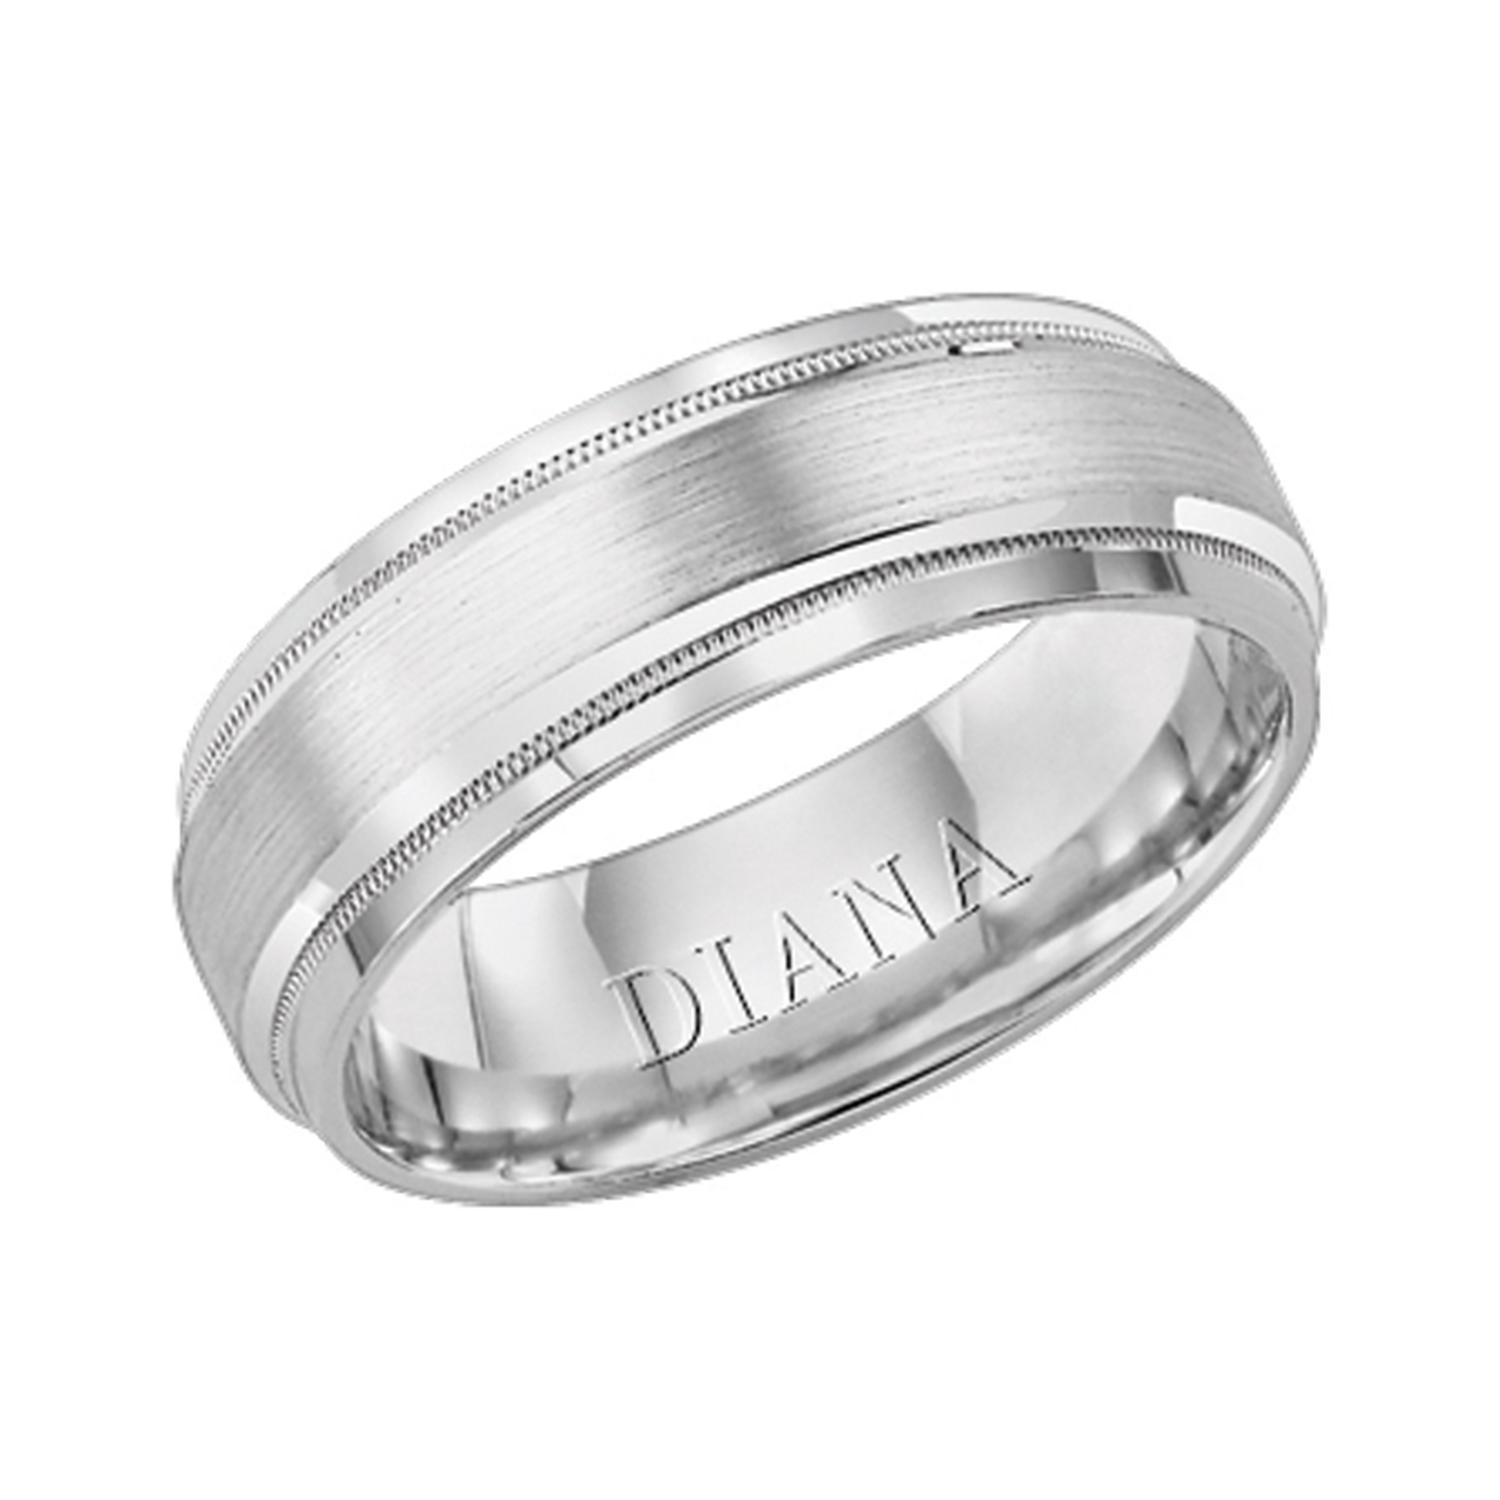 Gents 18K White Gold Wedding Band with Milgrain Accent 0